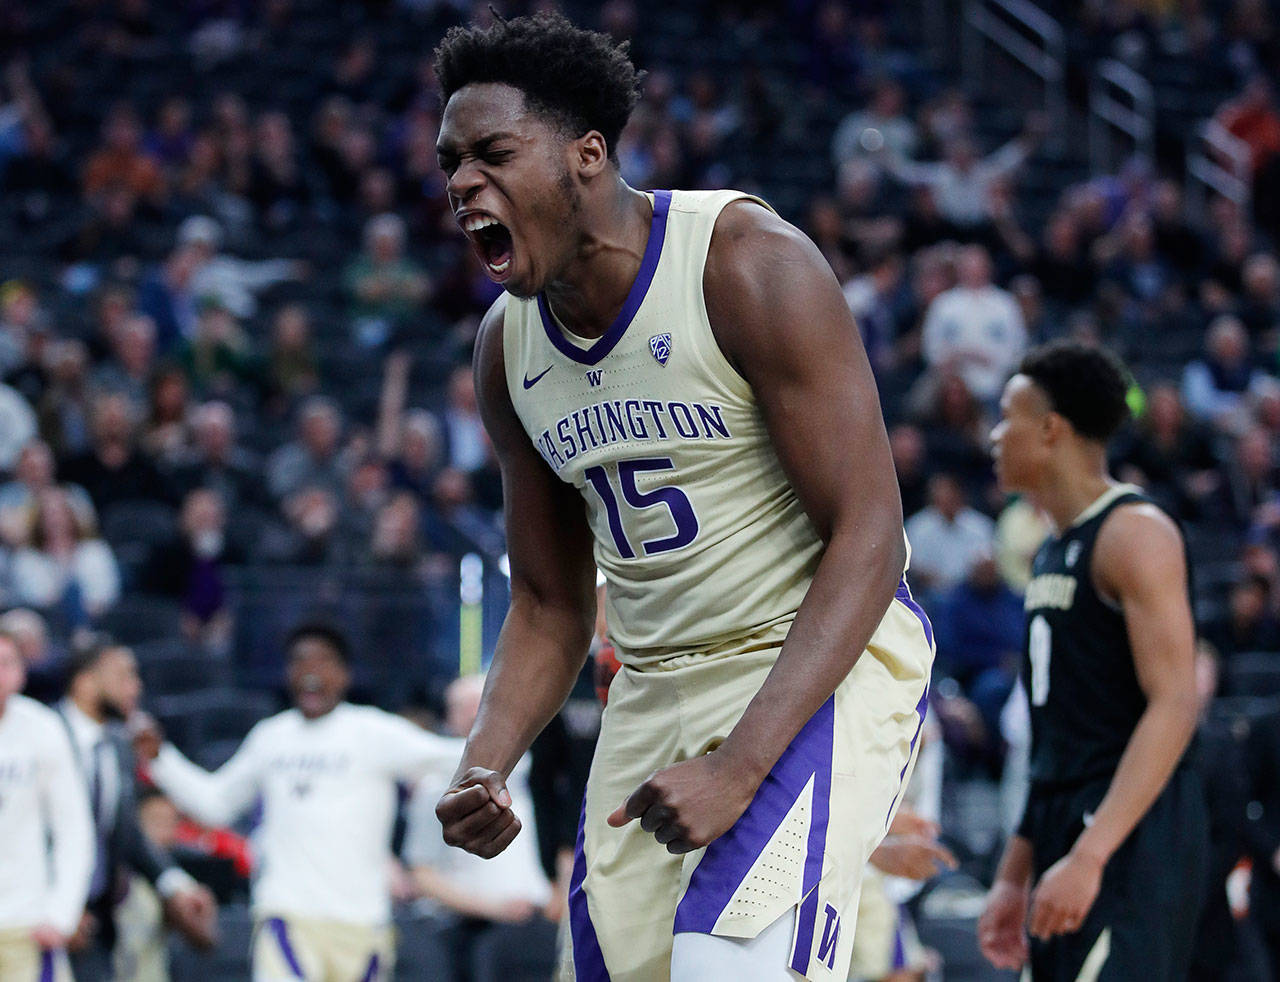 Washington’s Noah Dickerson celebrates after a play against Colorado during the second half of Pac-12 tournament semifinal on March 15, 2019, in Las Vegas. (AP Photo/John Locher)